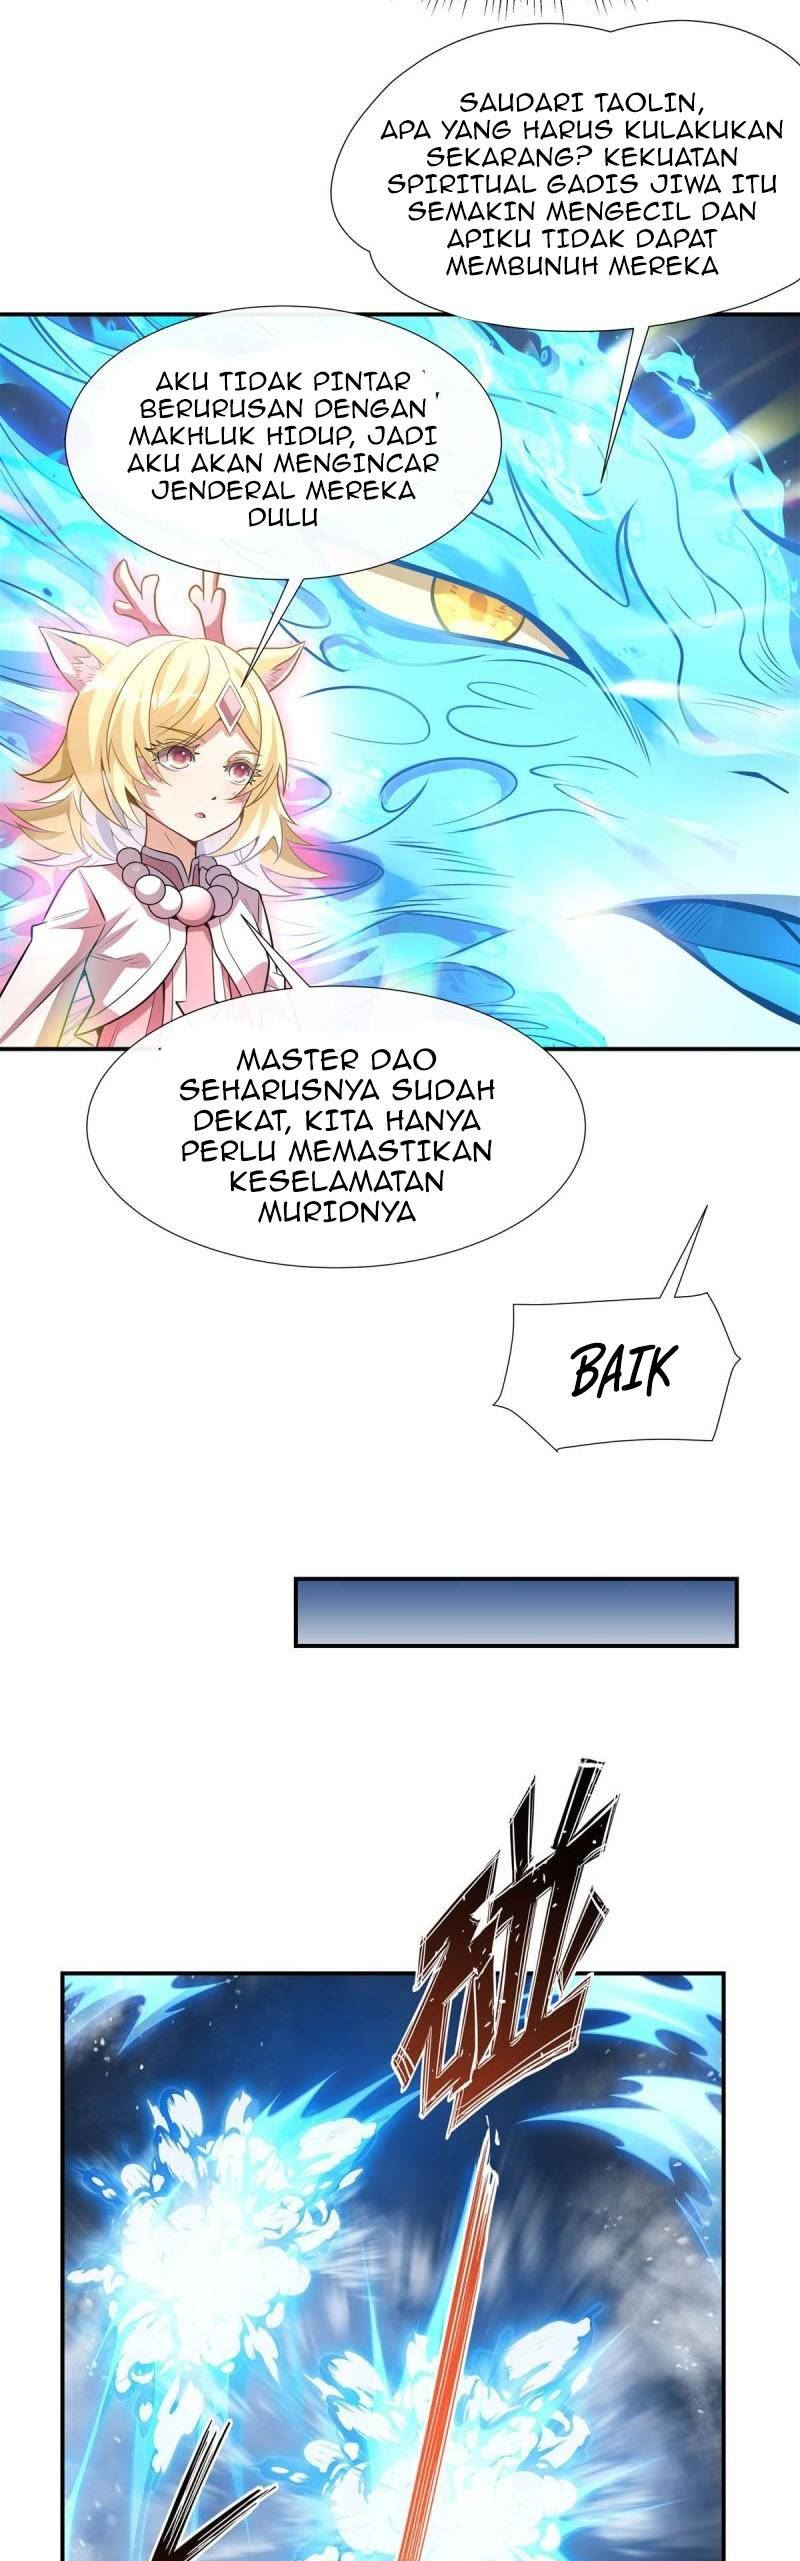 Dilarang COPAS - situs resmi www.mangacanblog.com - Komik my female apprentices are all big shots from the future 078 - chapter 78 79 Indonesia my female apprentices are all big shots from the future 078 - chapter 78 Terbaru 5|Baca Manga Komik Indonesia|Mangacan